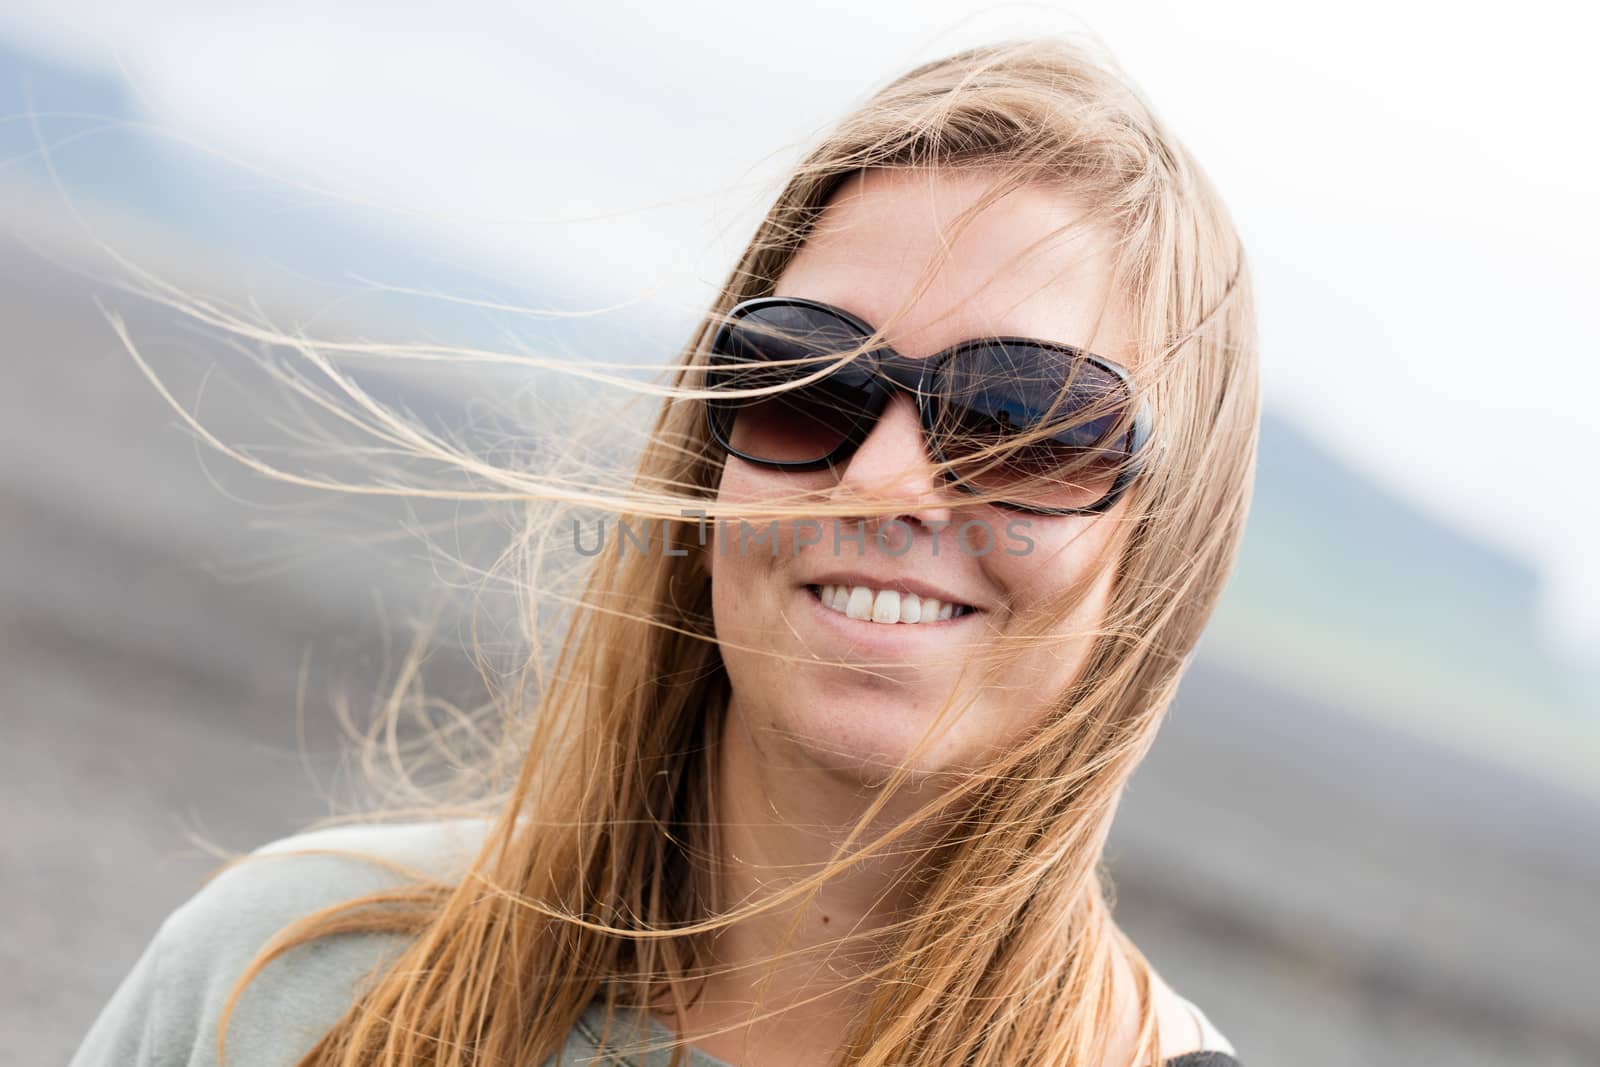 Young woman wearing sunglasses laughing in the fall